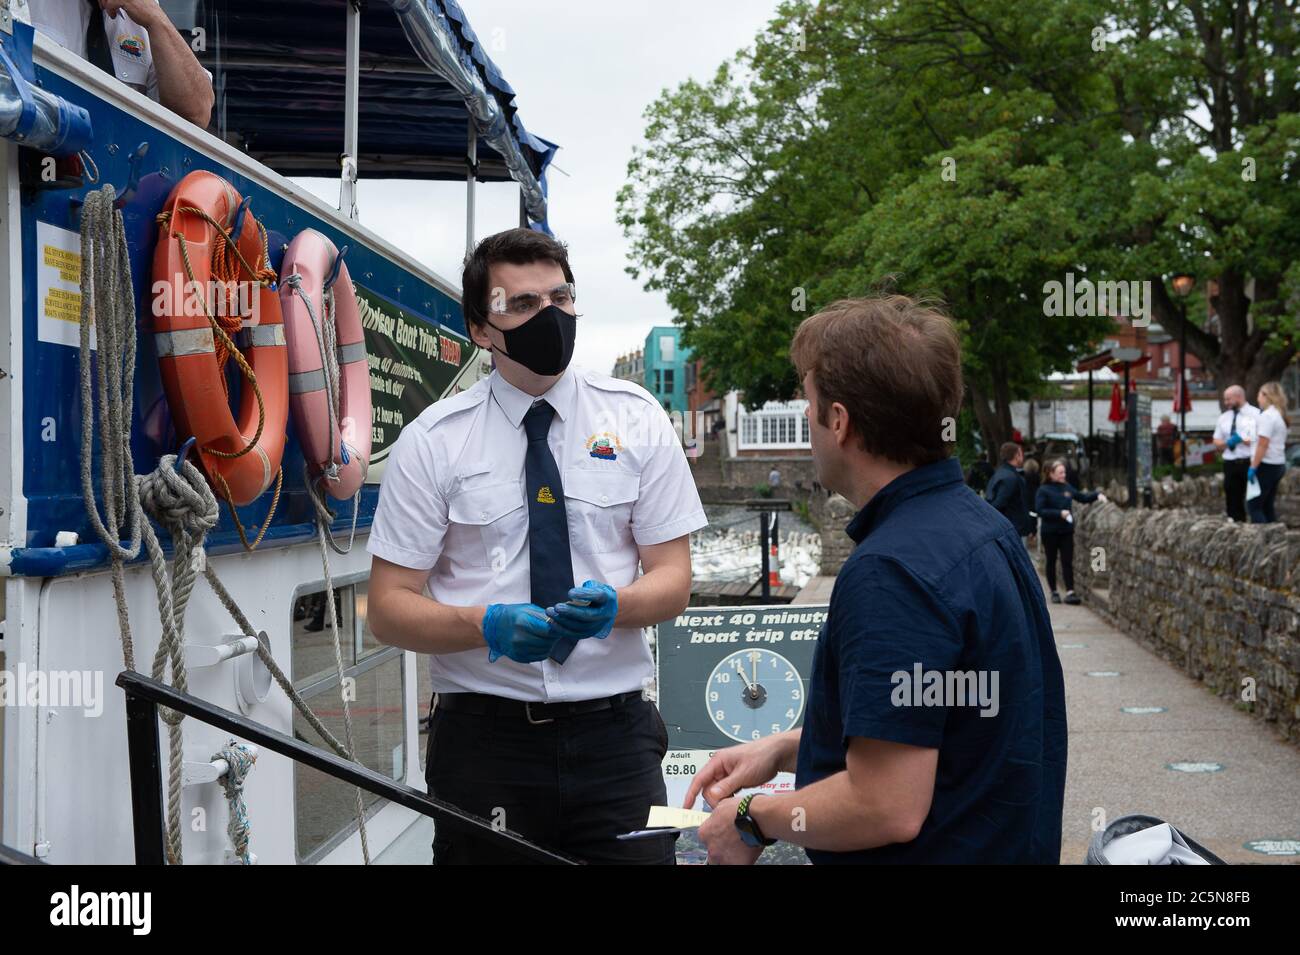 Windsor, Berkshire, UK. 4th July, 2020. French Brothers passenger boats returned to the River Thames in Windsor, Berkshire today for the first time since the Coronavirus Covid-19 lockdown. Stringent hygiene and social distancing measures are in place on their boats to ensure customer safety. French Brothers have 20 boats and have the largest number of passenger boats on inland waterways in the UK. Credit: Maureen McLean/Alamy Live News Stock Photo